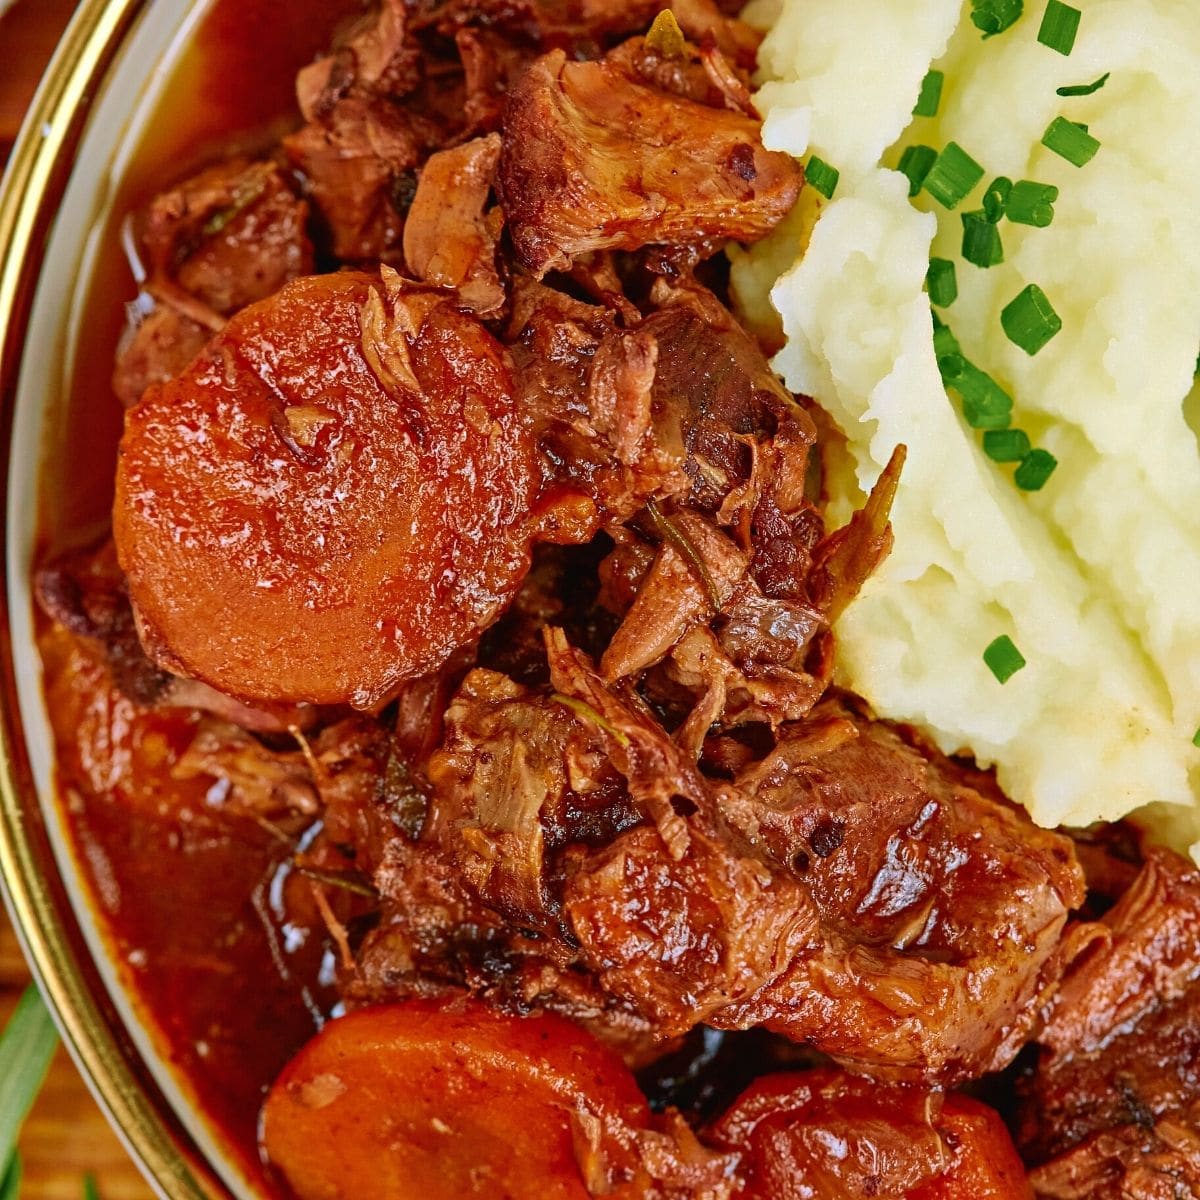 Beef casserole served with mashed potatoes.